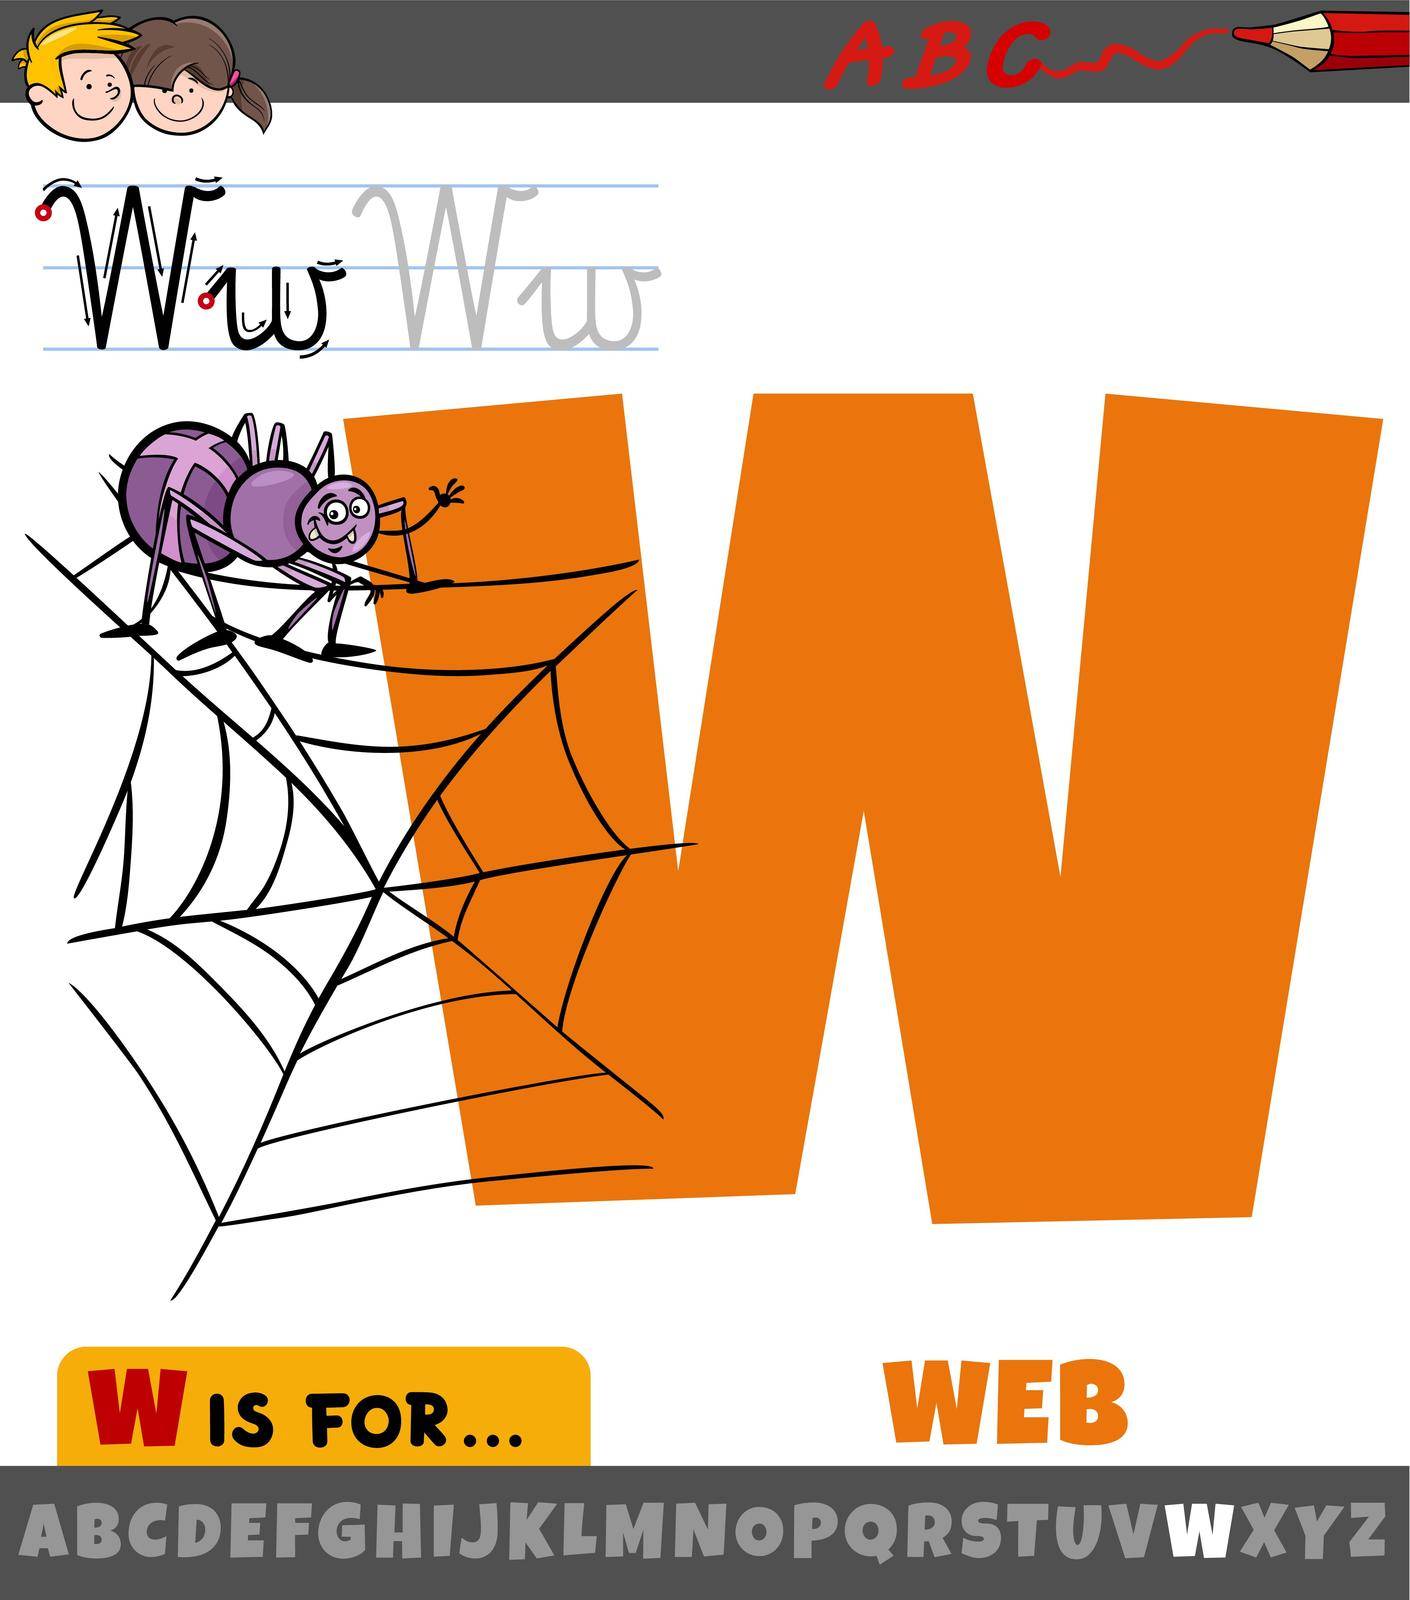 Educational cartoon illustration of letter W from alphabet with web